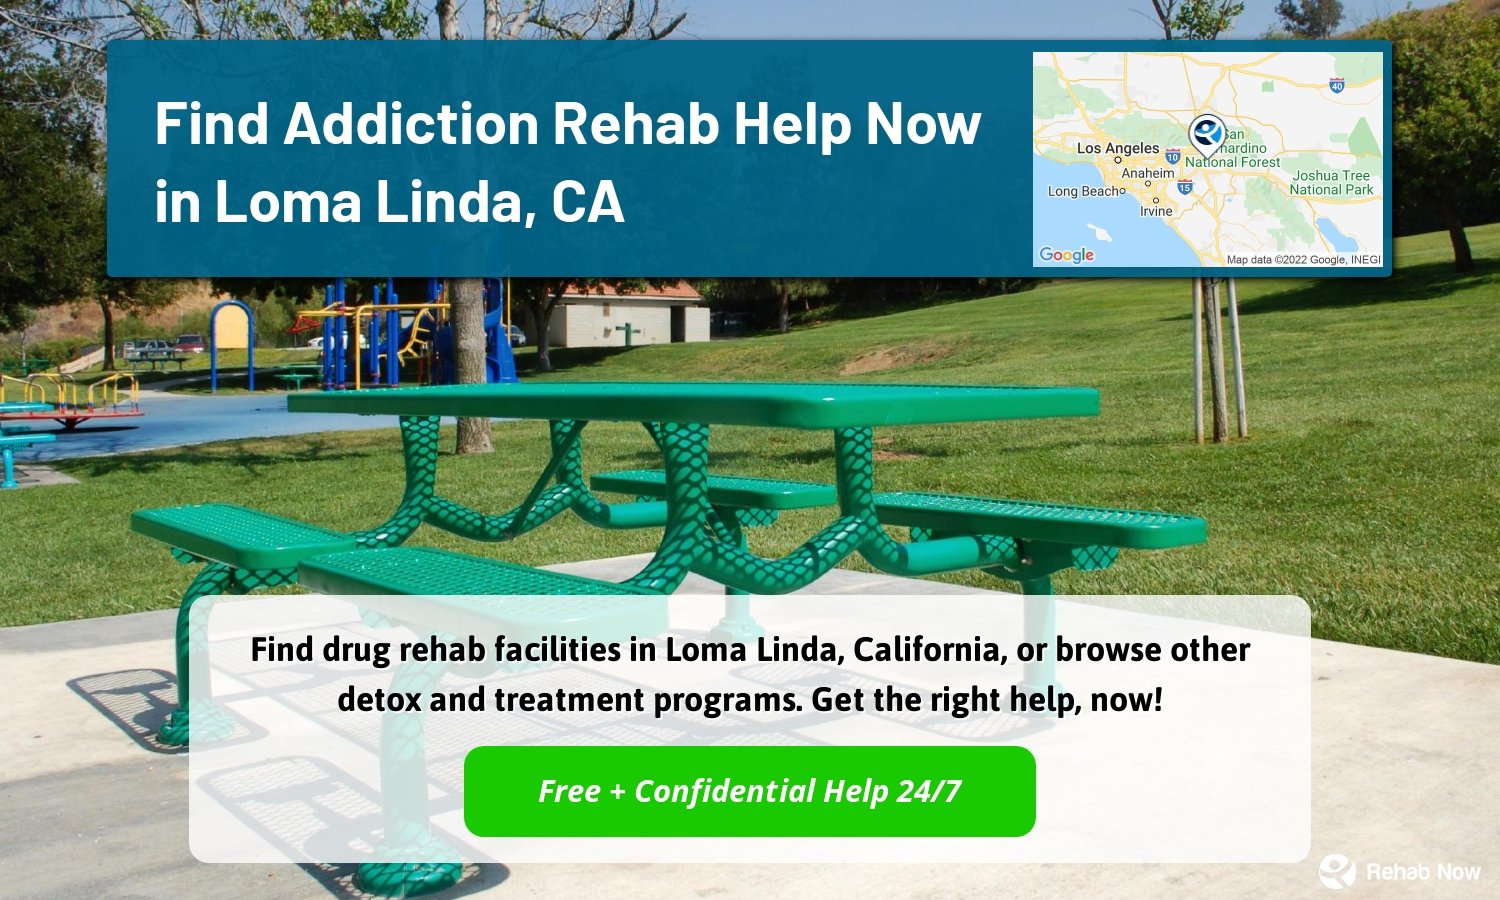 Find drug rehab facilities in Loma Linda, California, or browse other detox and treatment programs. Get the right help, now!